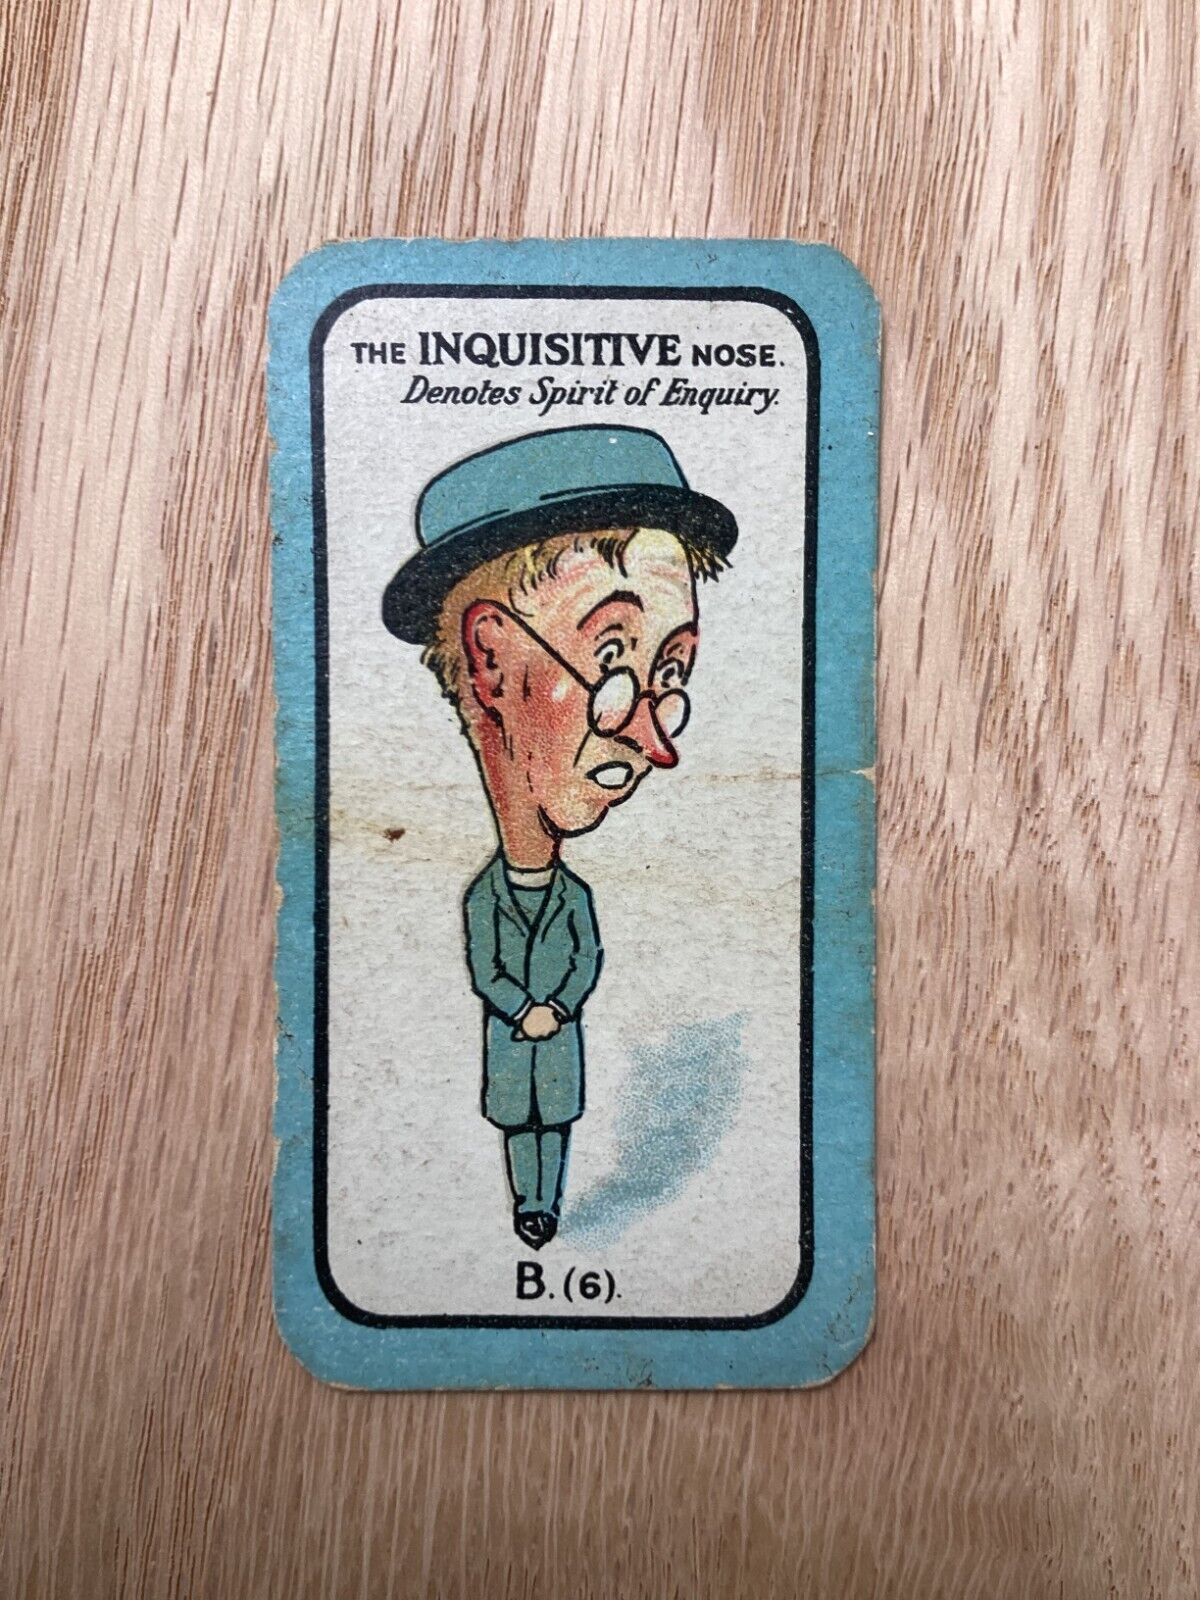 1927 Carreras Cigarette Trading Card  The Nose Game   B (6) Inquisitive   UK